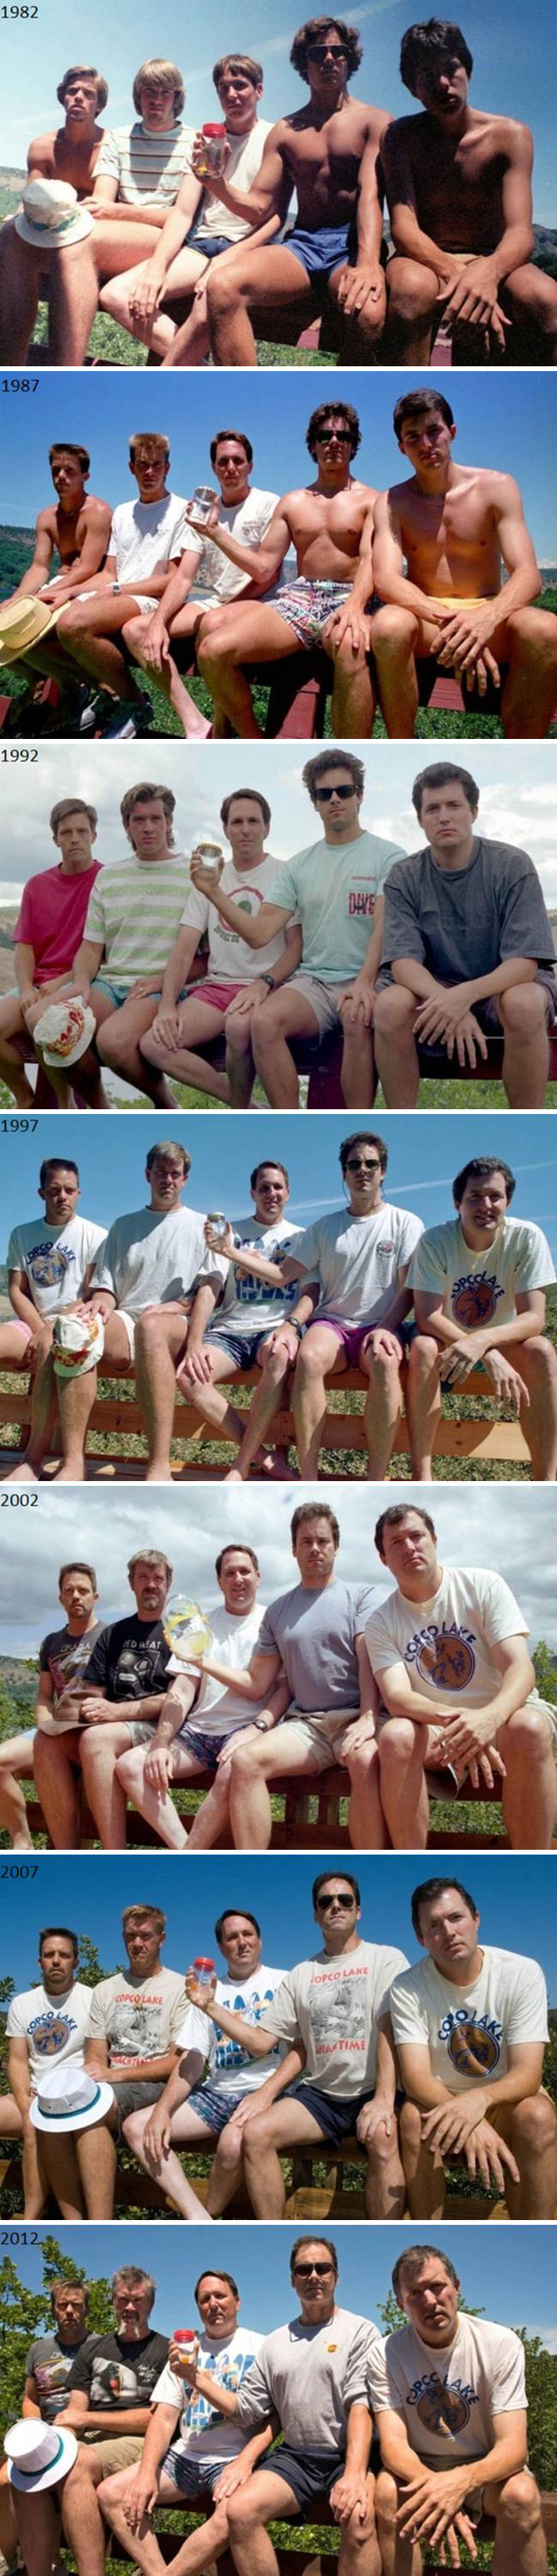 Every Five Years From 1982-2012, Five Friends Take The Same Photo At Their Cabin At Copco Lake In California